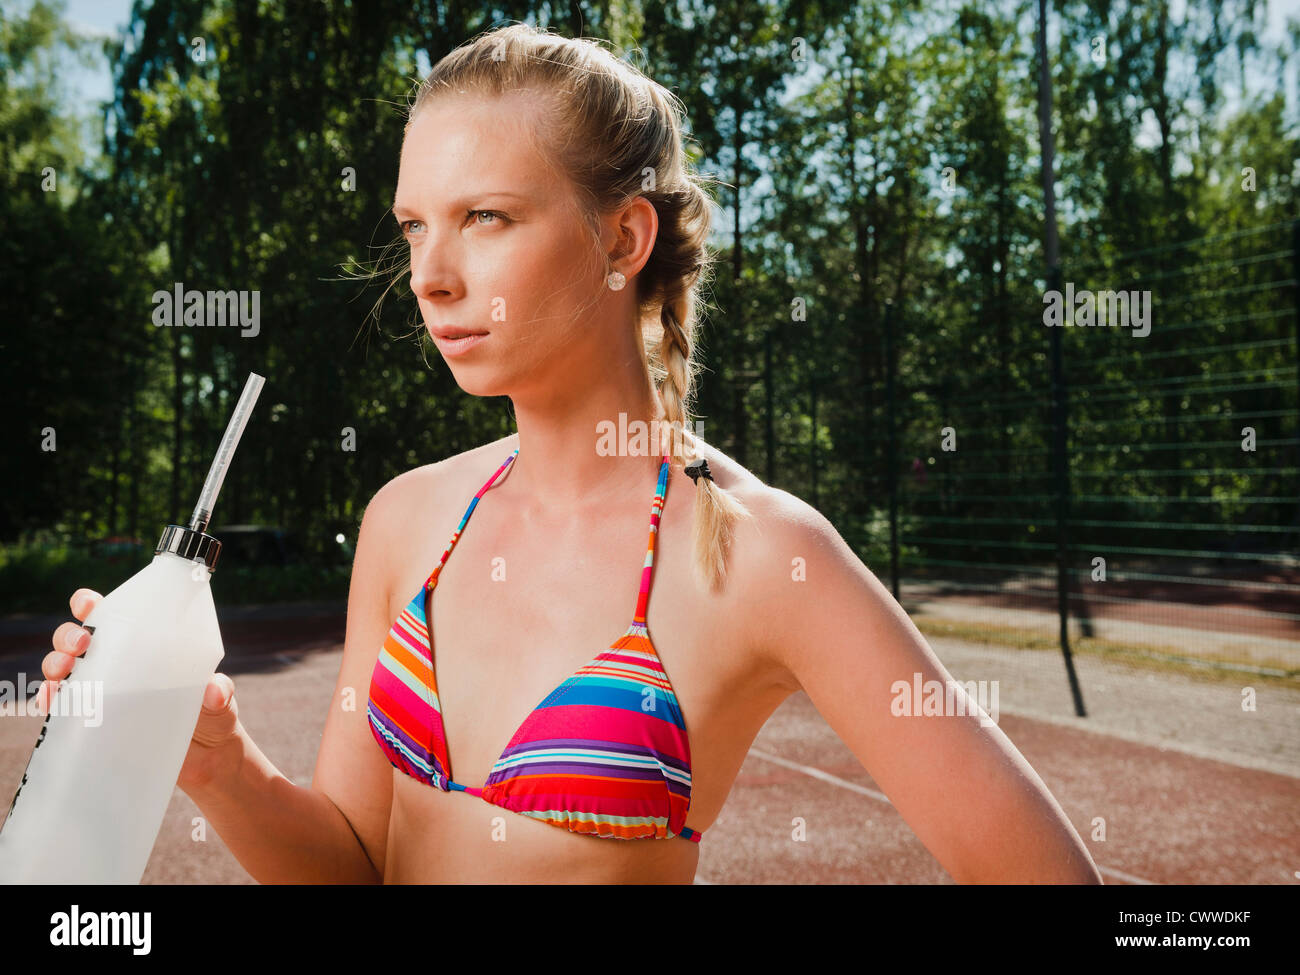 Woman drinking water on tennis court Stock Photo